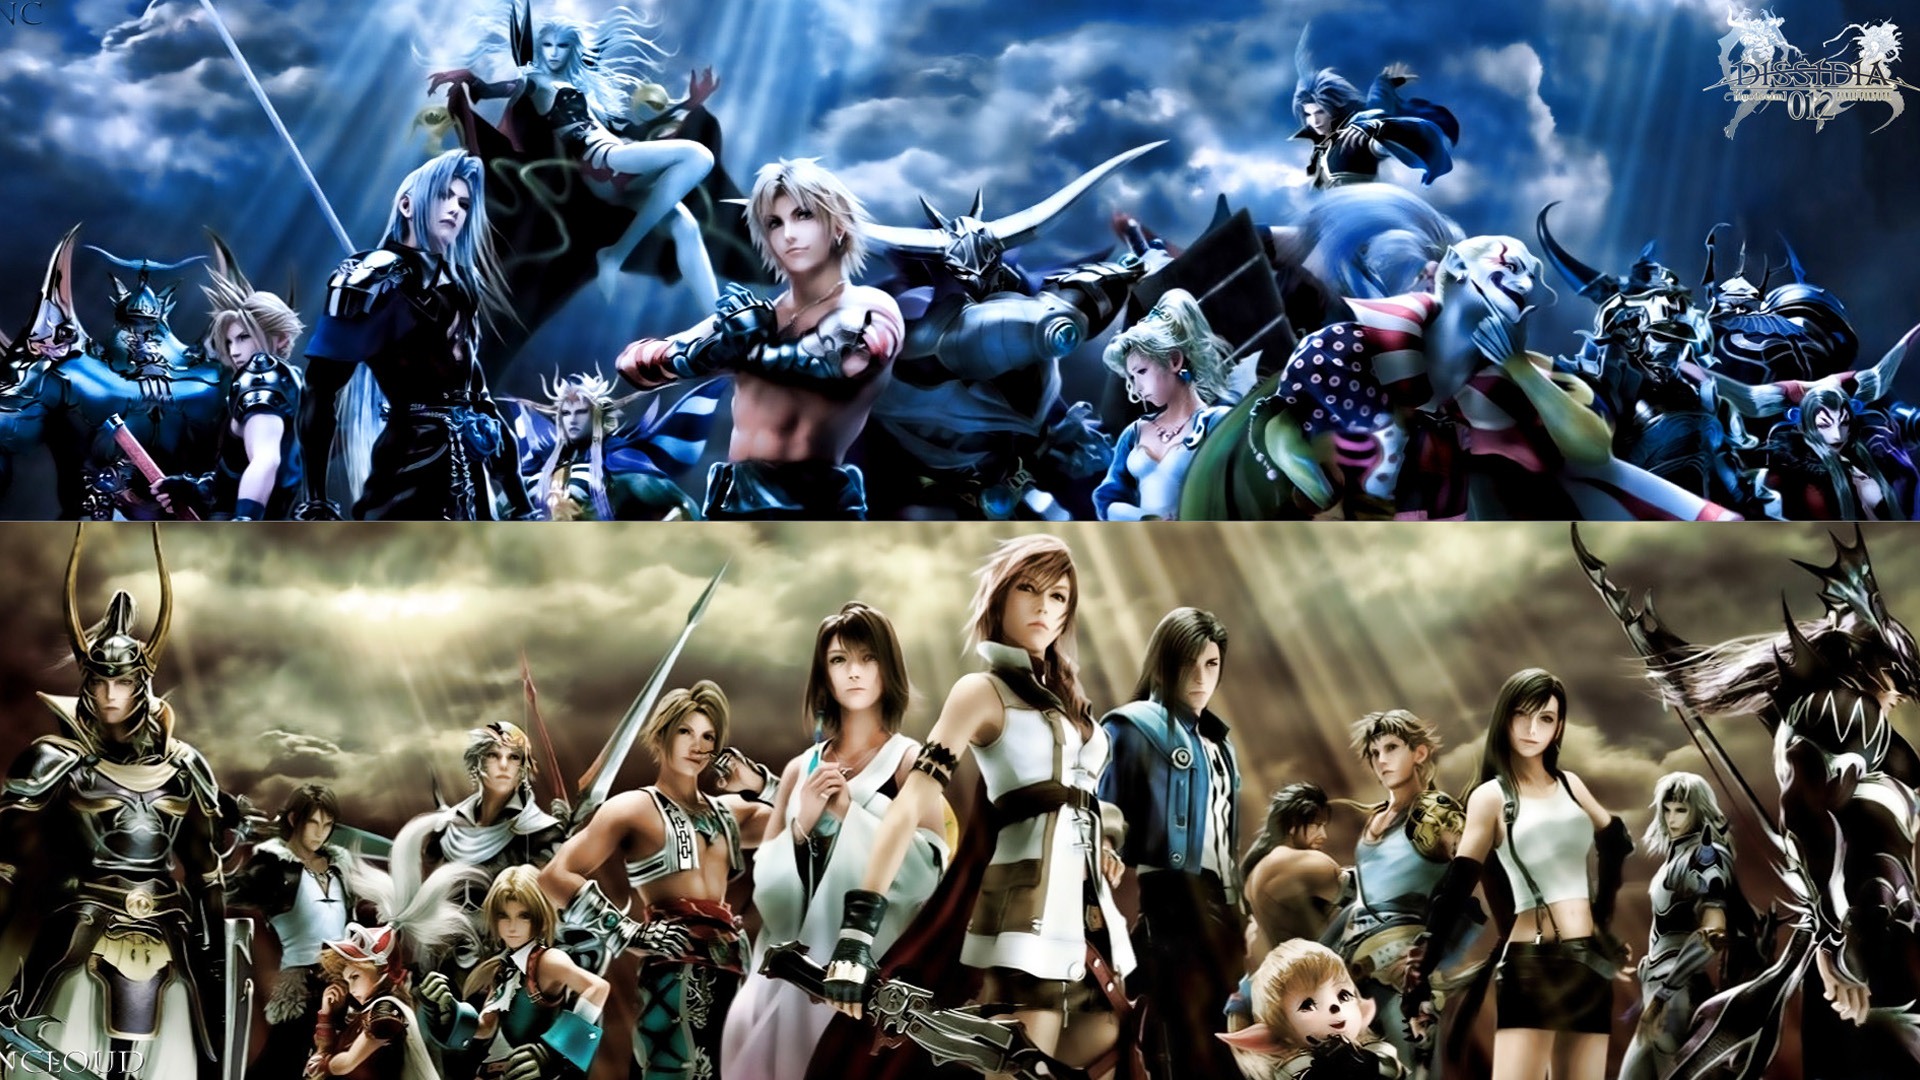 Free Download Final Fantasy Hd Wallpapers 1920x1080 For Your Desktop Mobile Tablet Explore 77 Ff Wallpaper Ffxiii Wallpaper Ffxi Wallpaper Lightning Ff Wallpaper